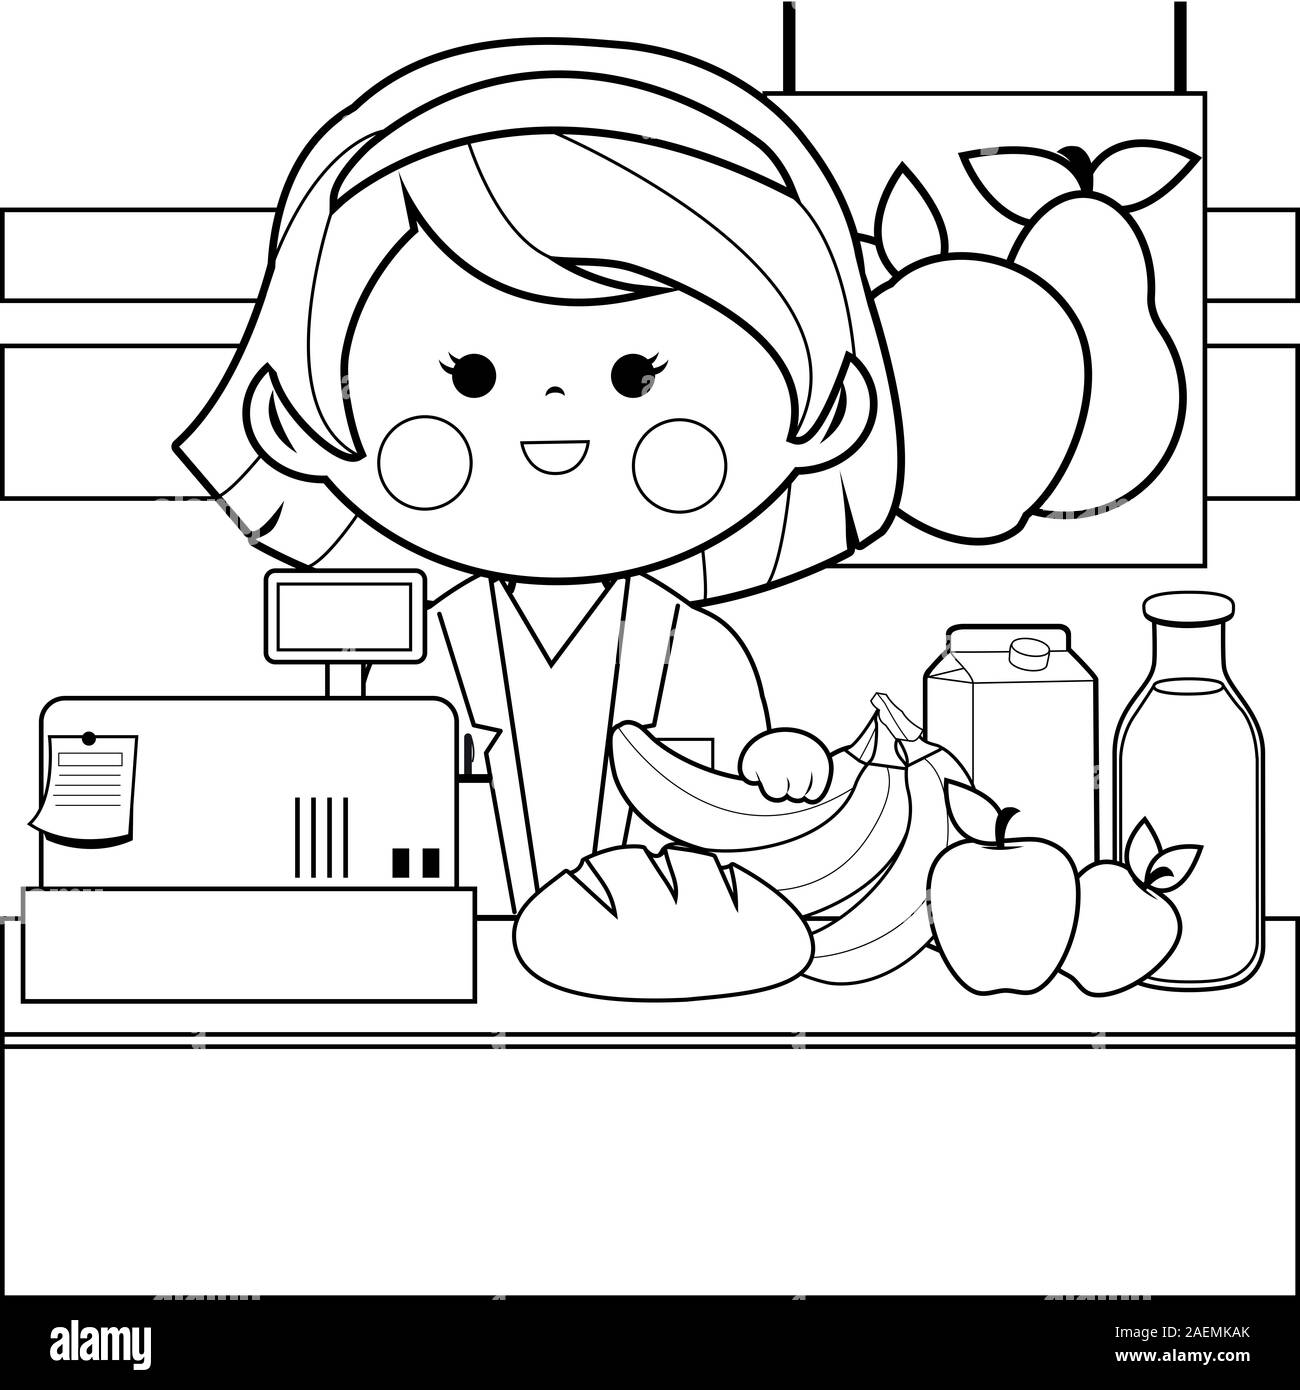 Grocery store employee at the counter black and white coloring page stock photo